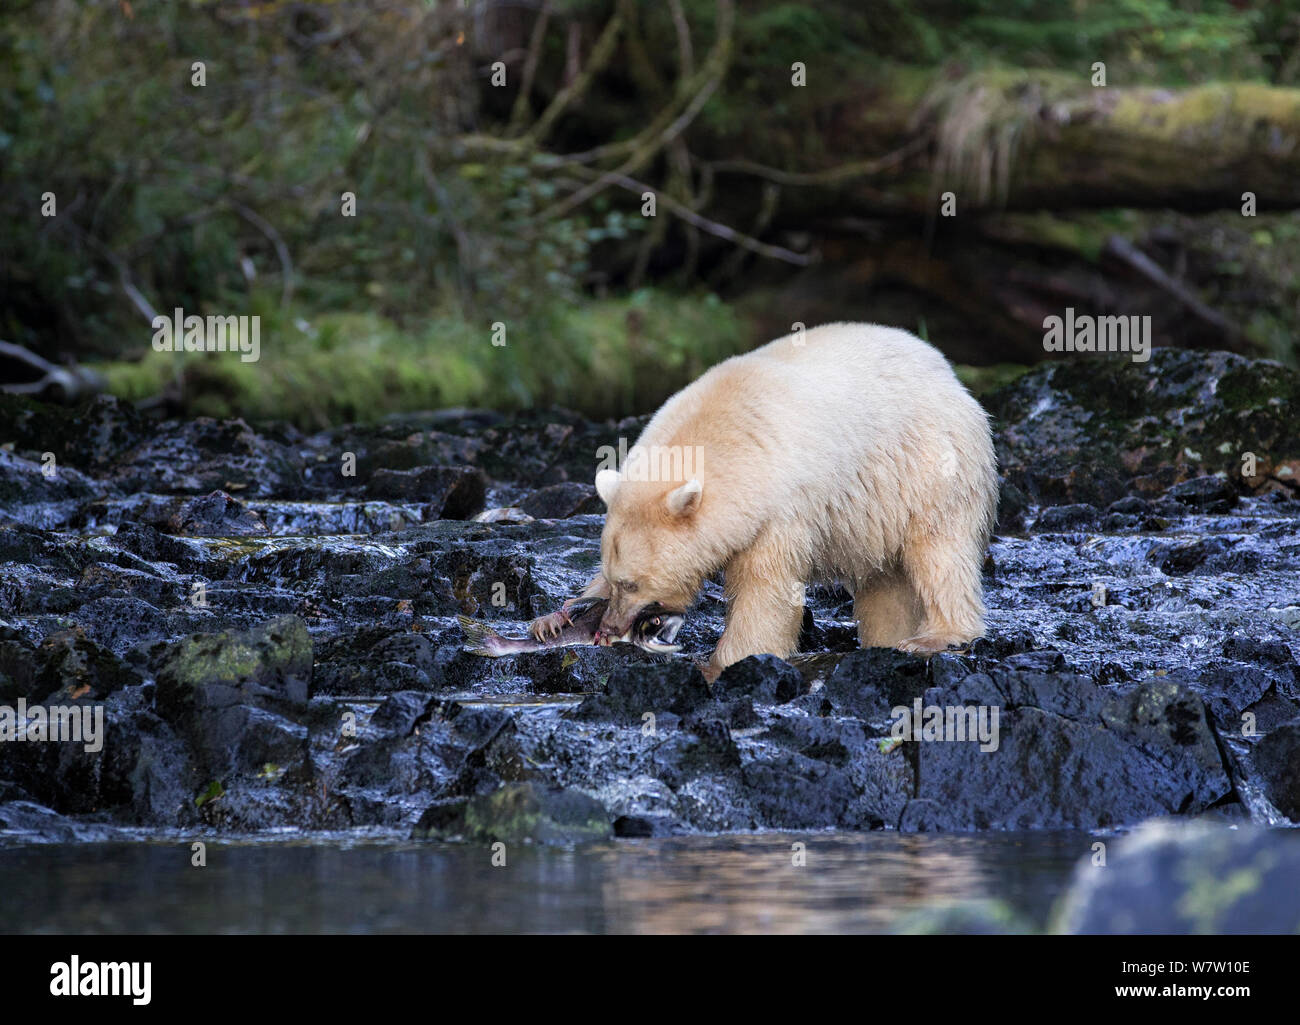 Kermode Bear (Ursus americanus kermodei) with pink salmon in its claws and mouth, Great Bear Rainforest, British Columbia, Canada. Stock Photo